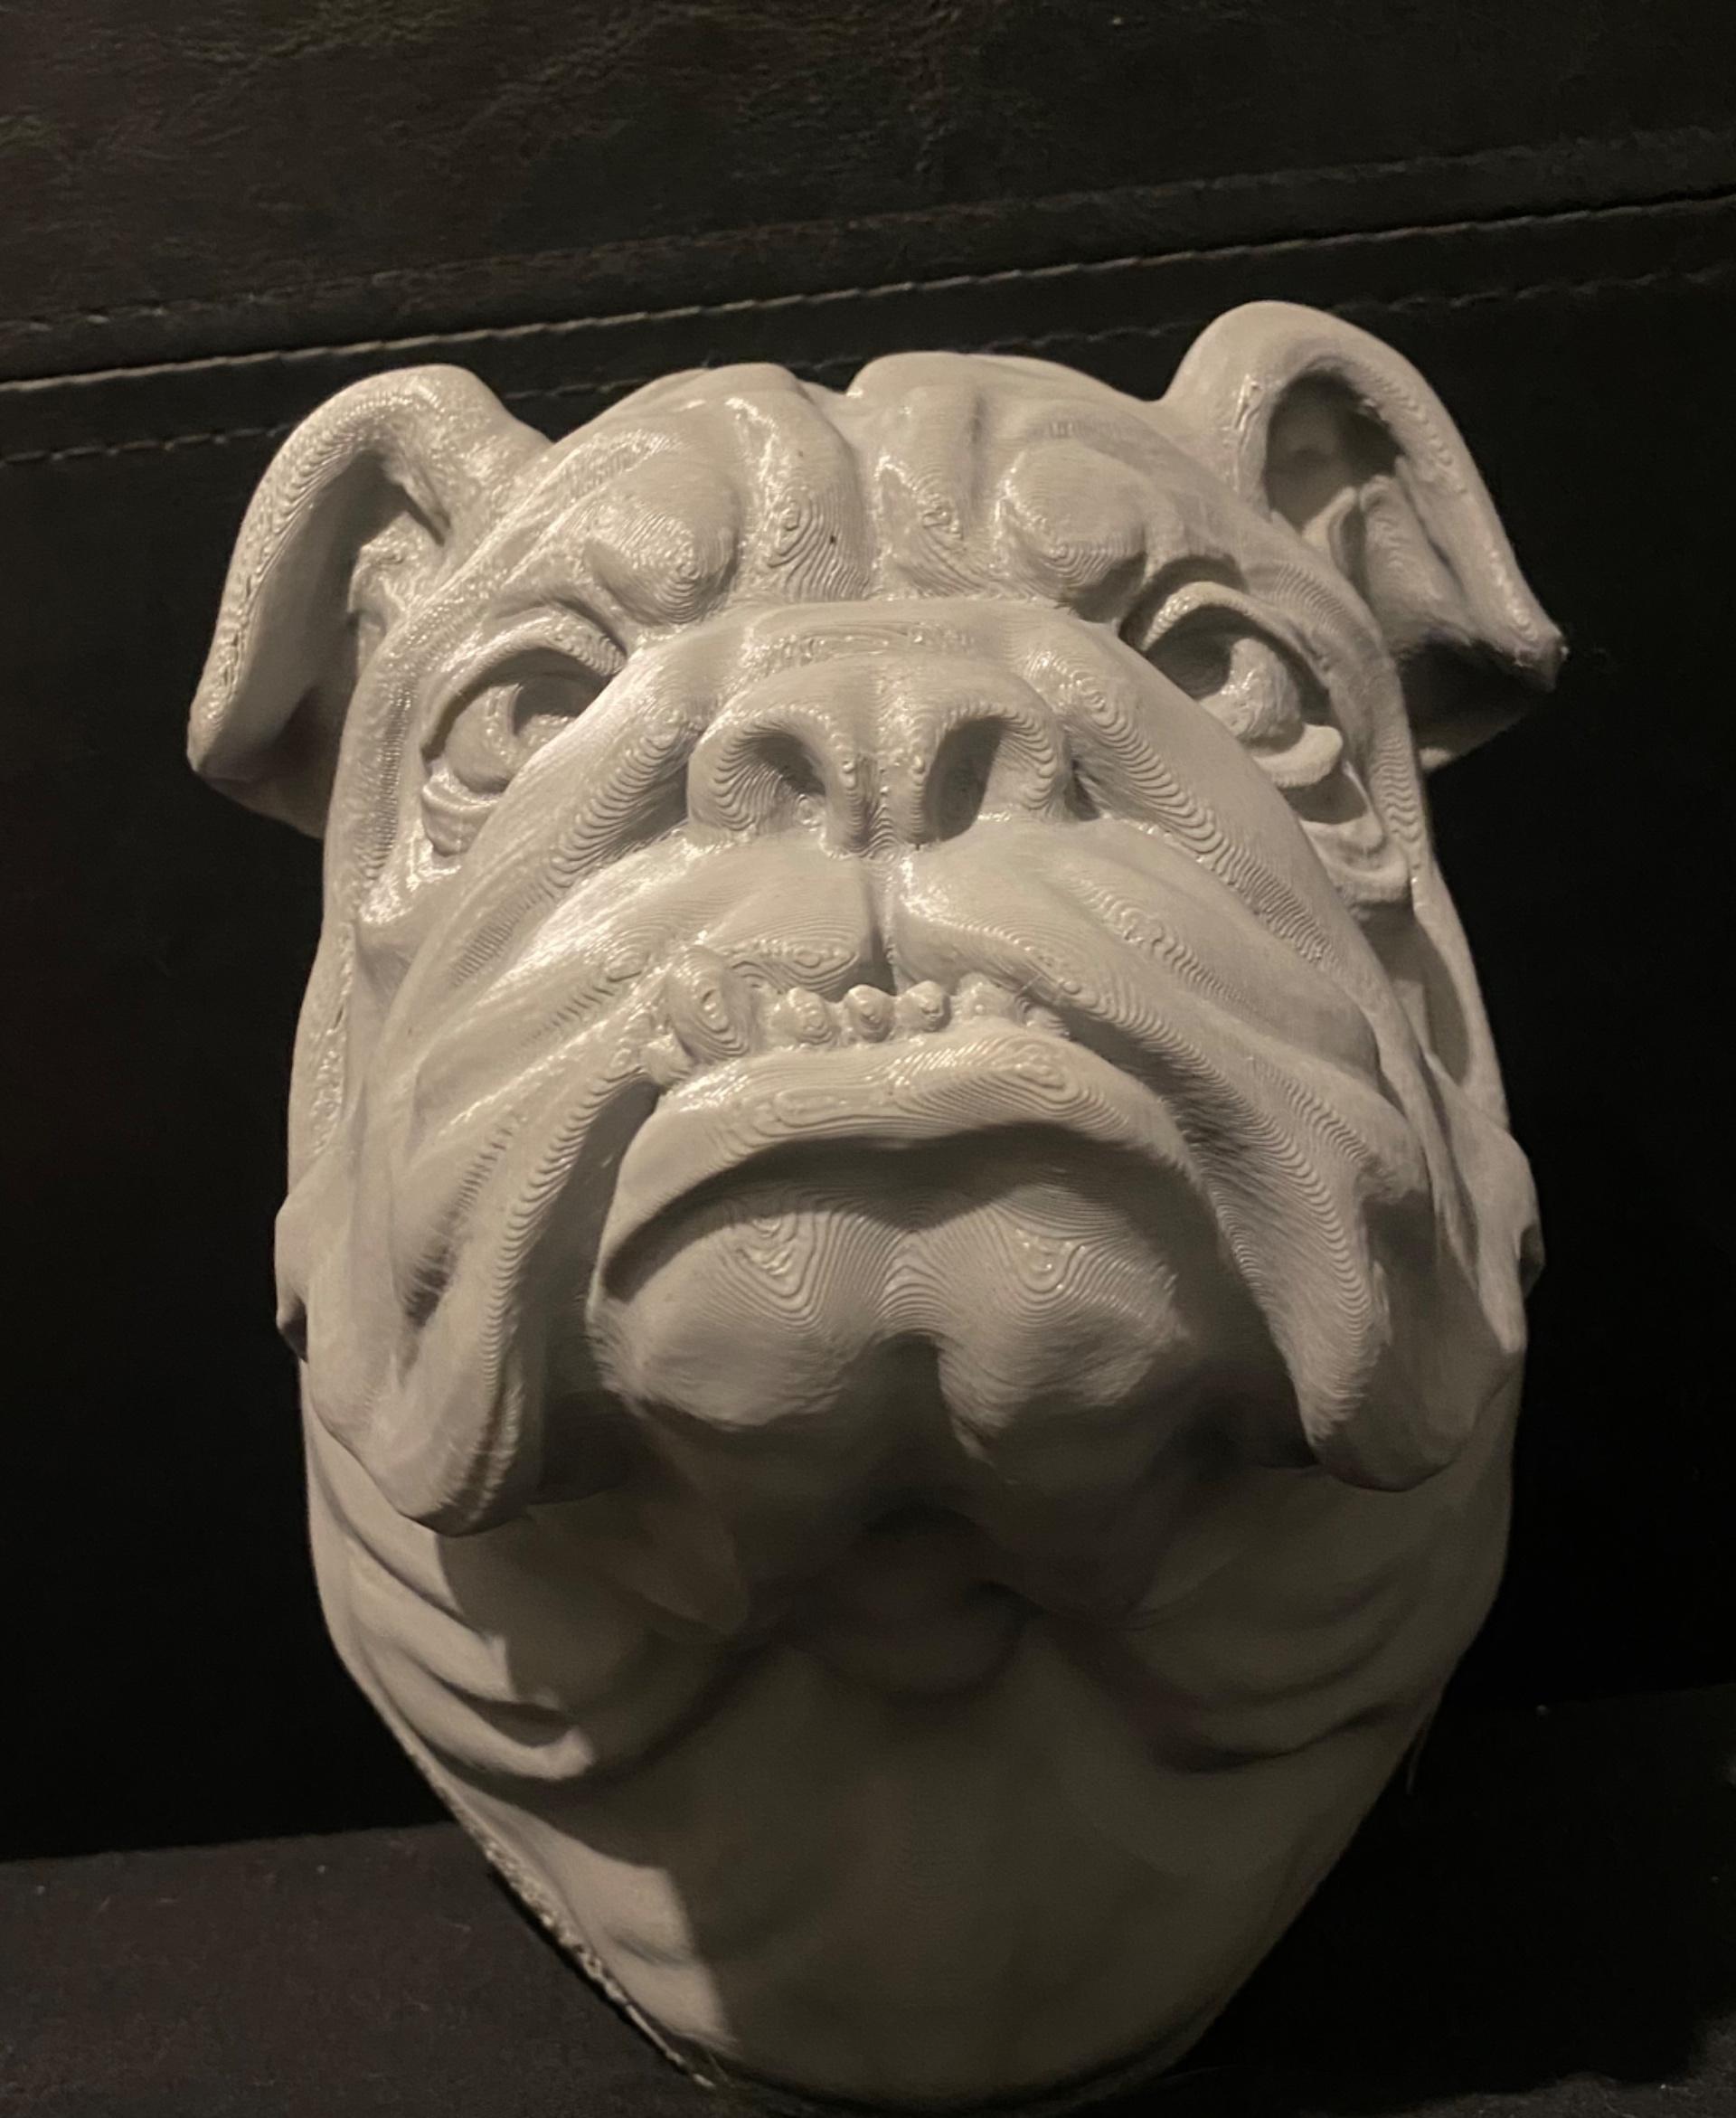 Bulldog - Wall Decoration - Had I bit of trouble at the start it started lifting I just held it down for a few layers then used a nail file to flatten it out 
Would be better if the first layer covered the hole base 
Overall I’m very happy with the design I upsized it by 150%
Thanks for sharing  - 3d model